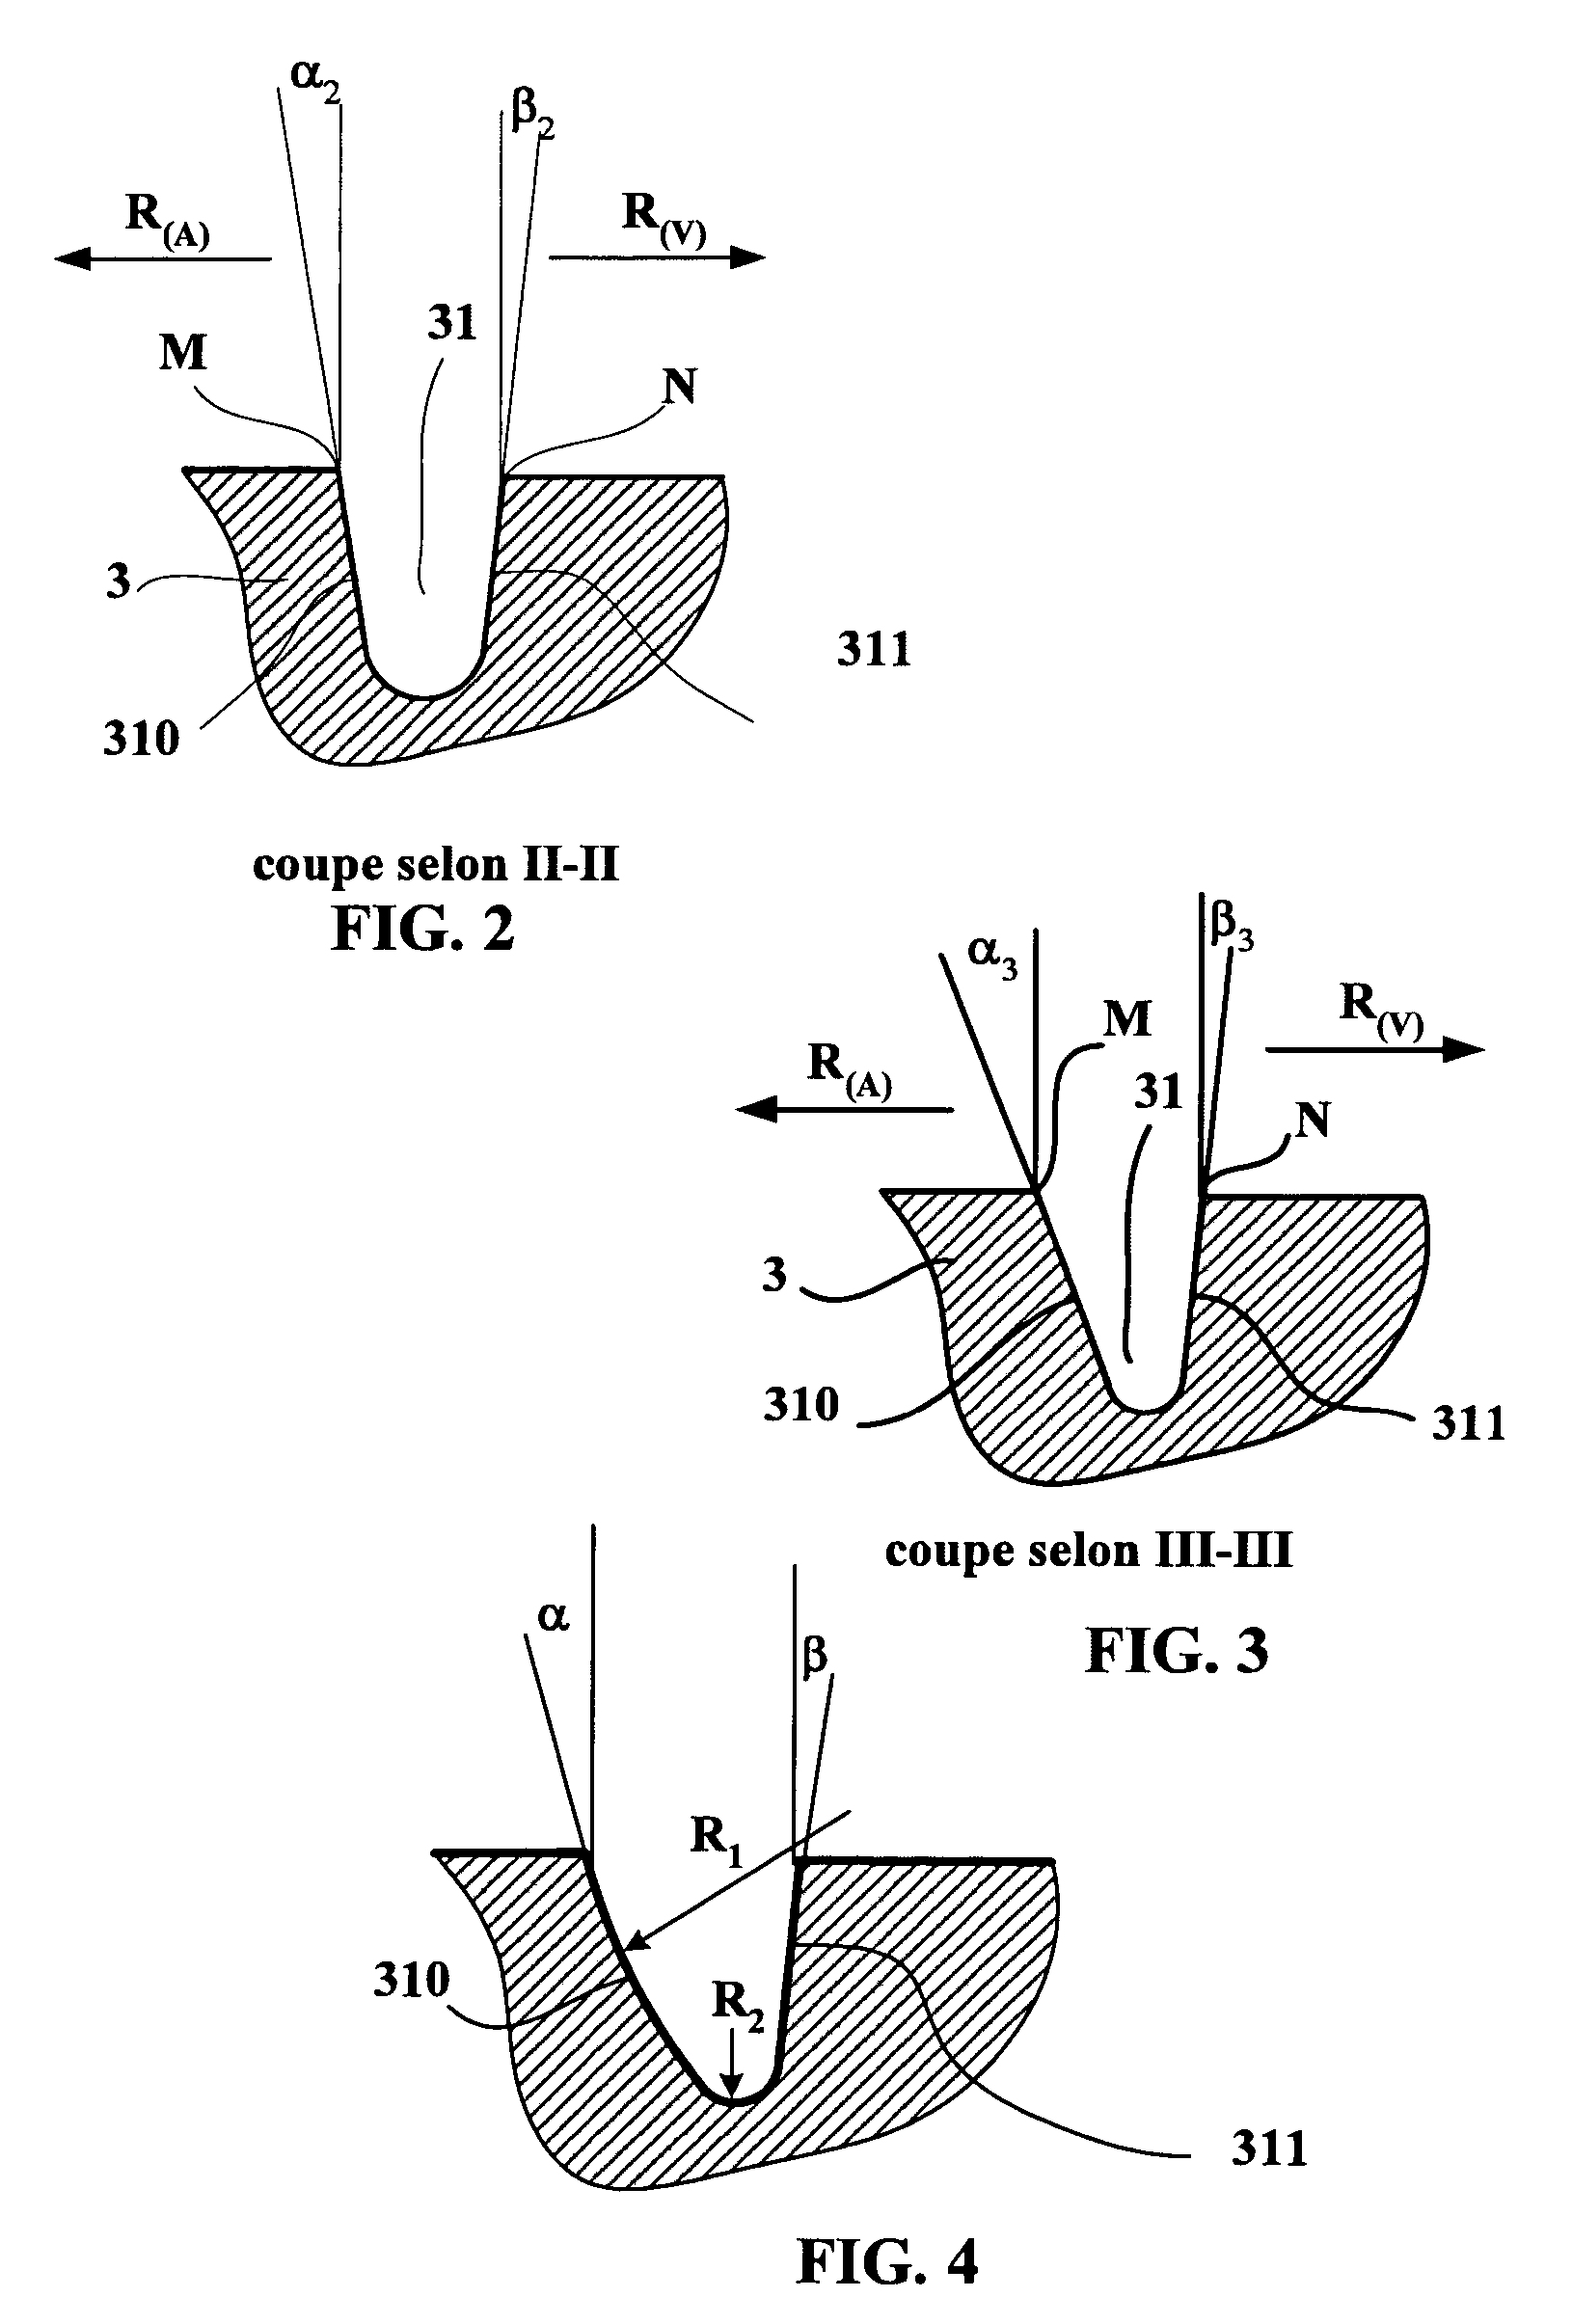 Method of mounting tires to civil engineering vehicles and associated tire